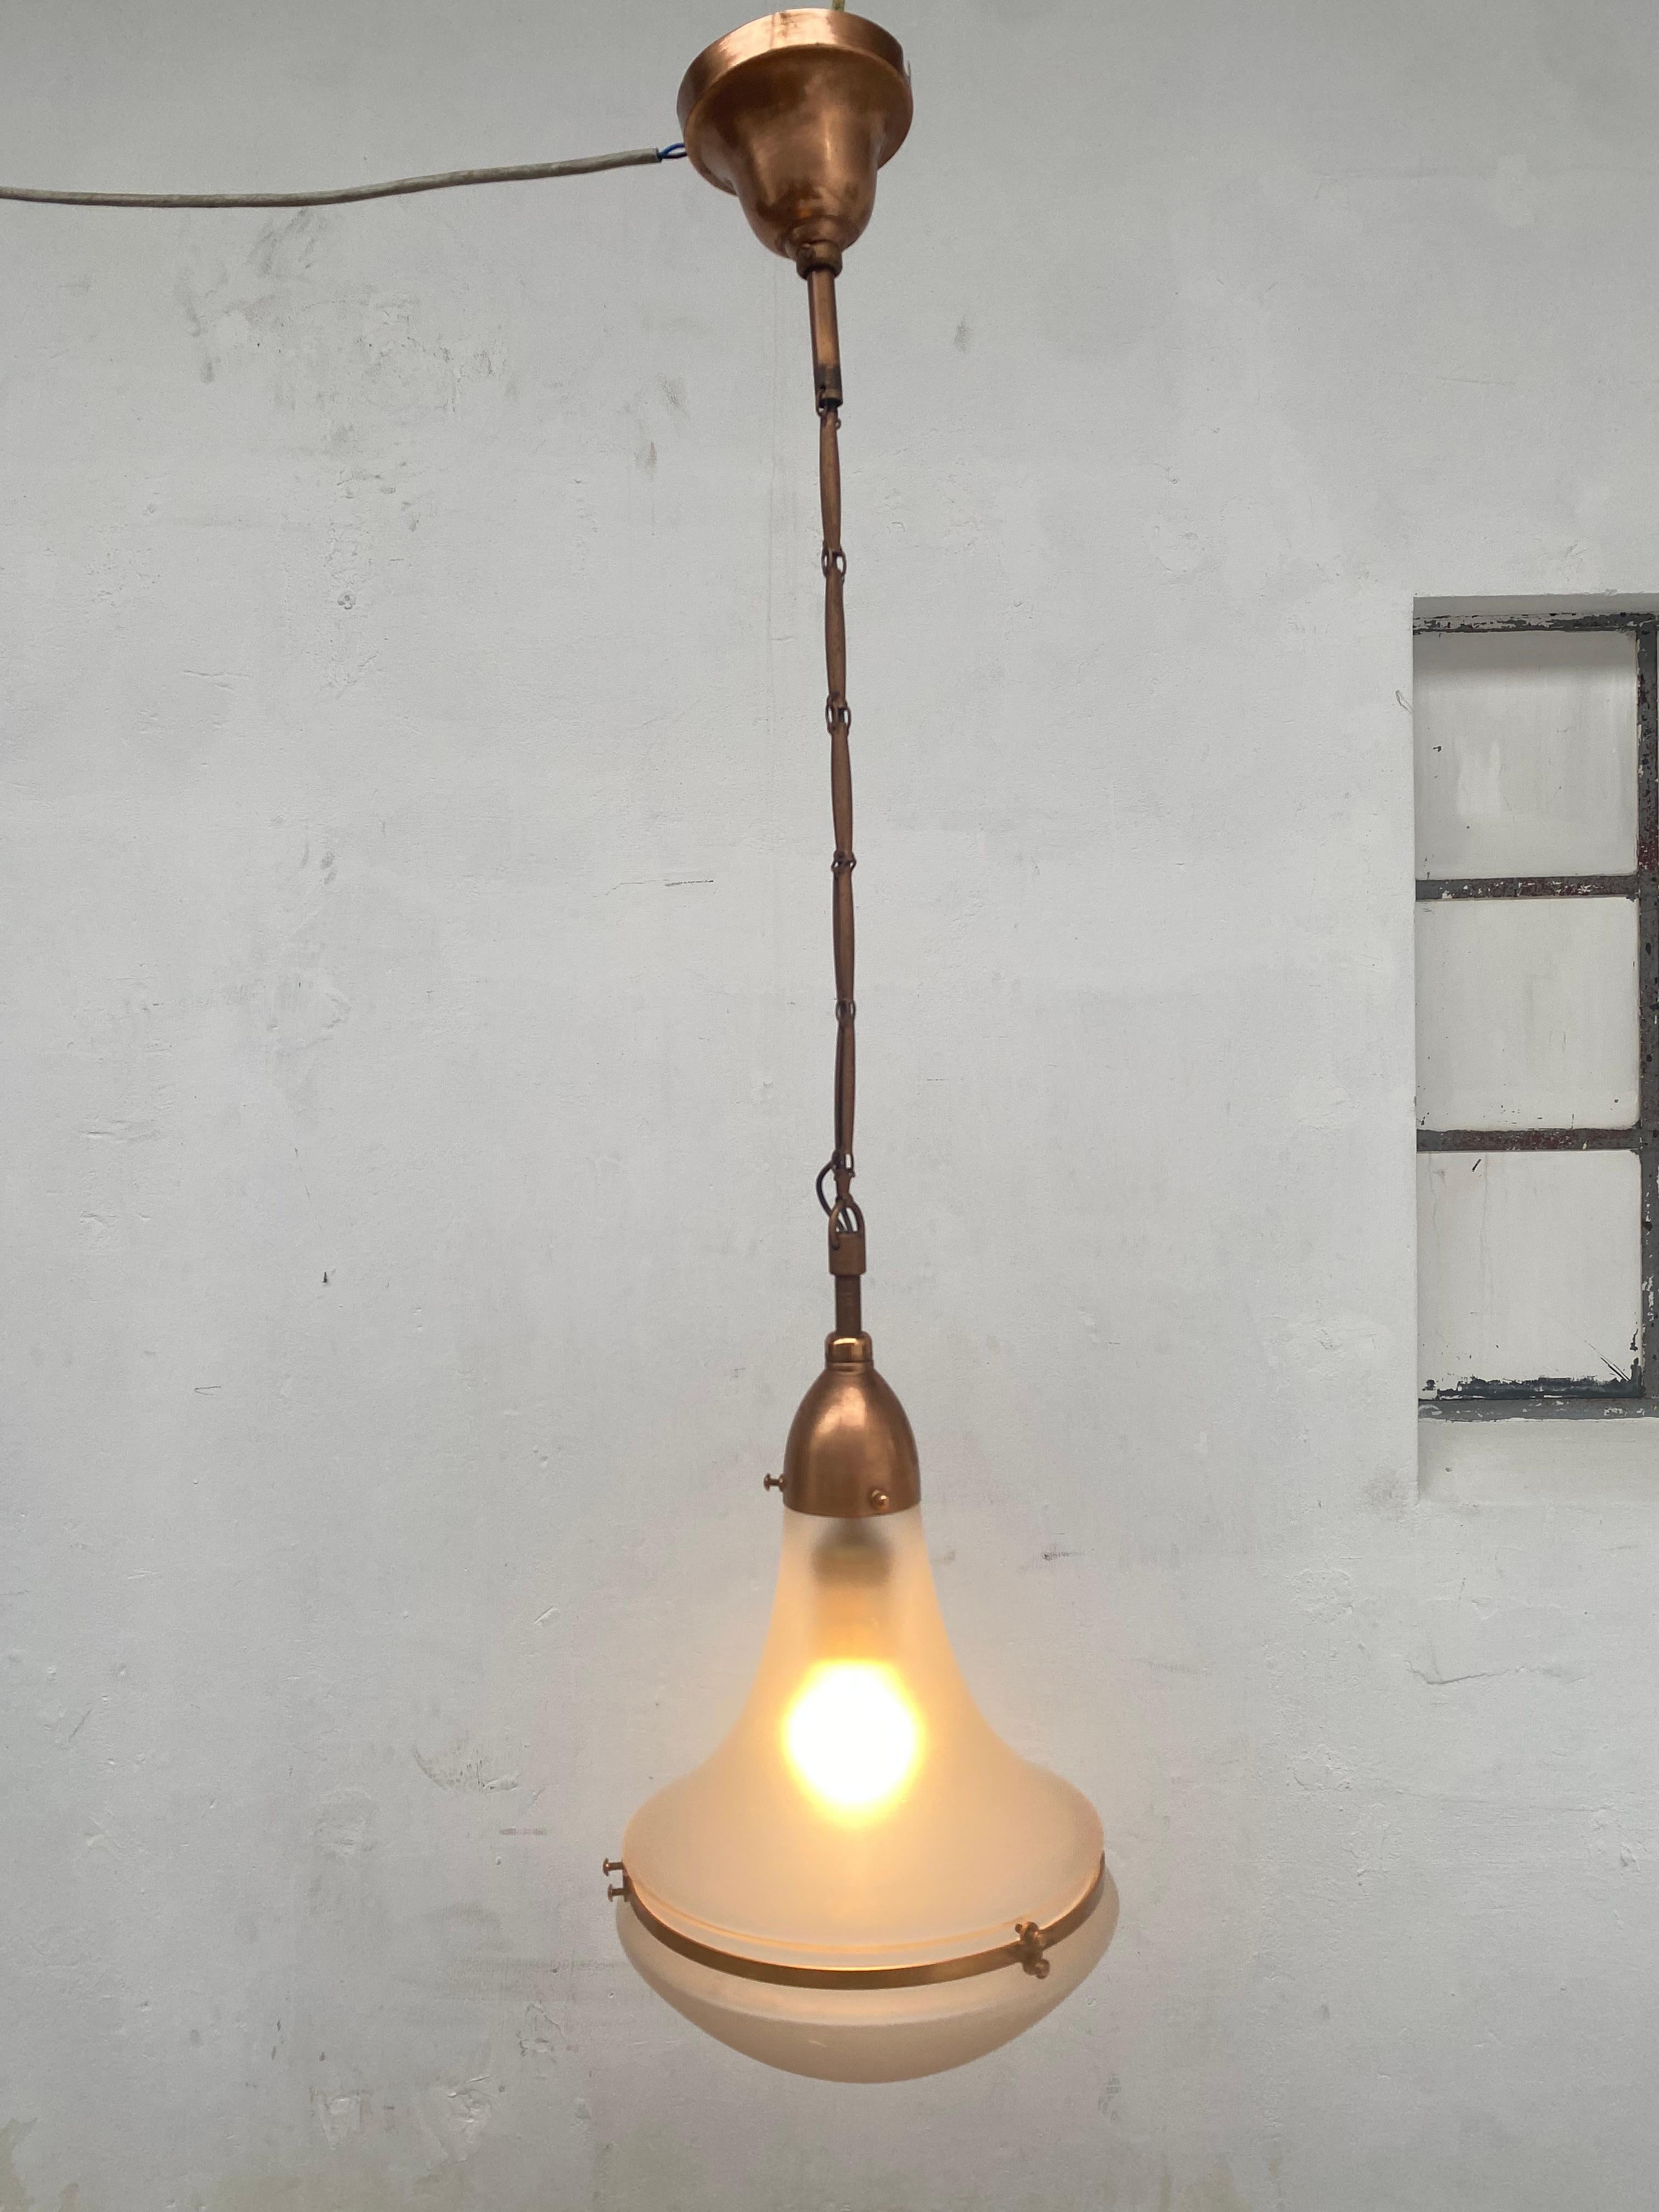  'Luzette' pendant lamp by Peter Behrens for Siemens, Germany 

A very nice Luzette pendant lamp, made in the early 20th century 

This Luzette lamp has its original decorative chain and ceiling canopy hardware in a red copper finish 

From its